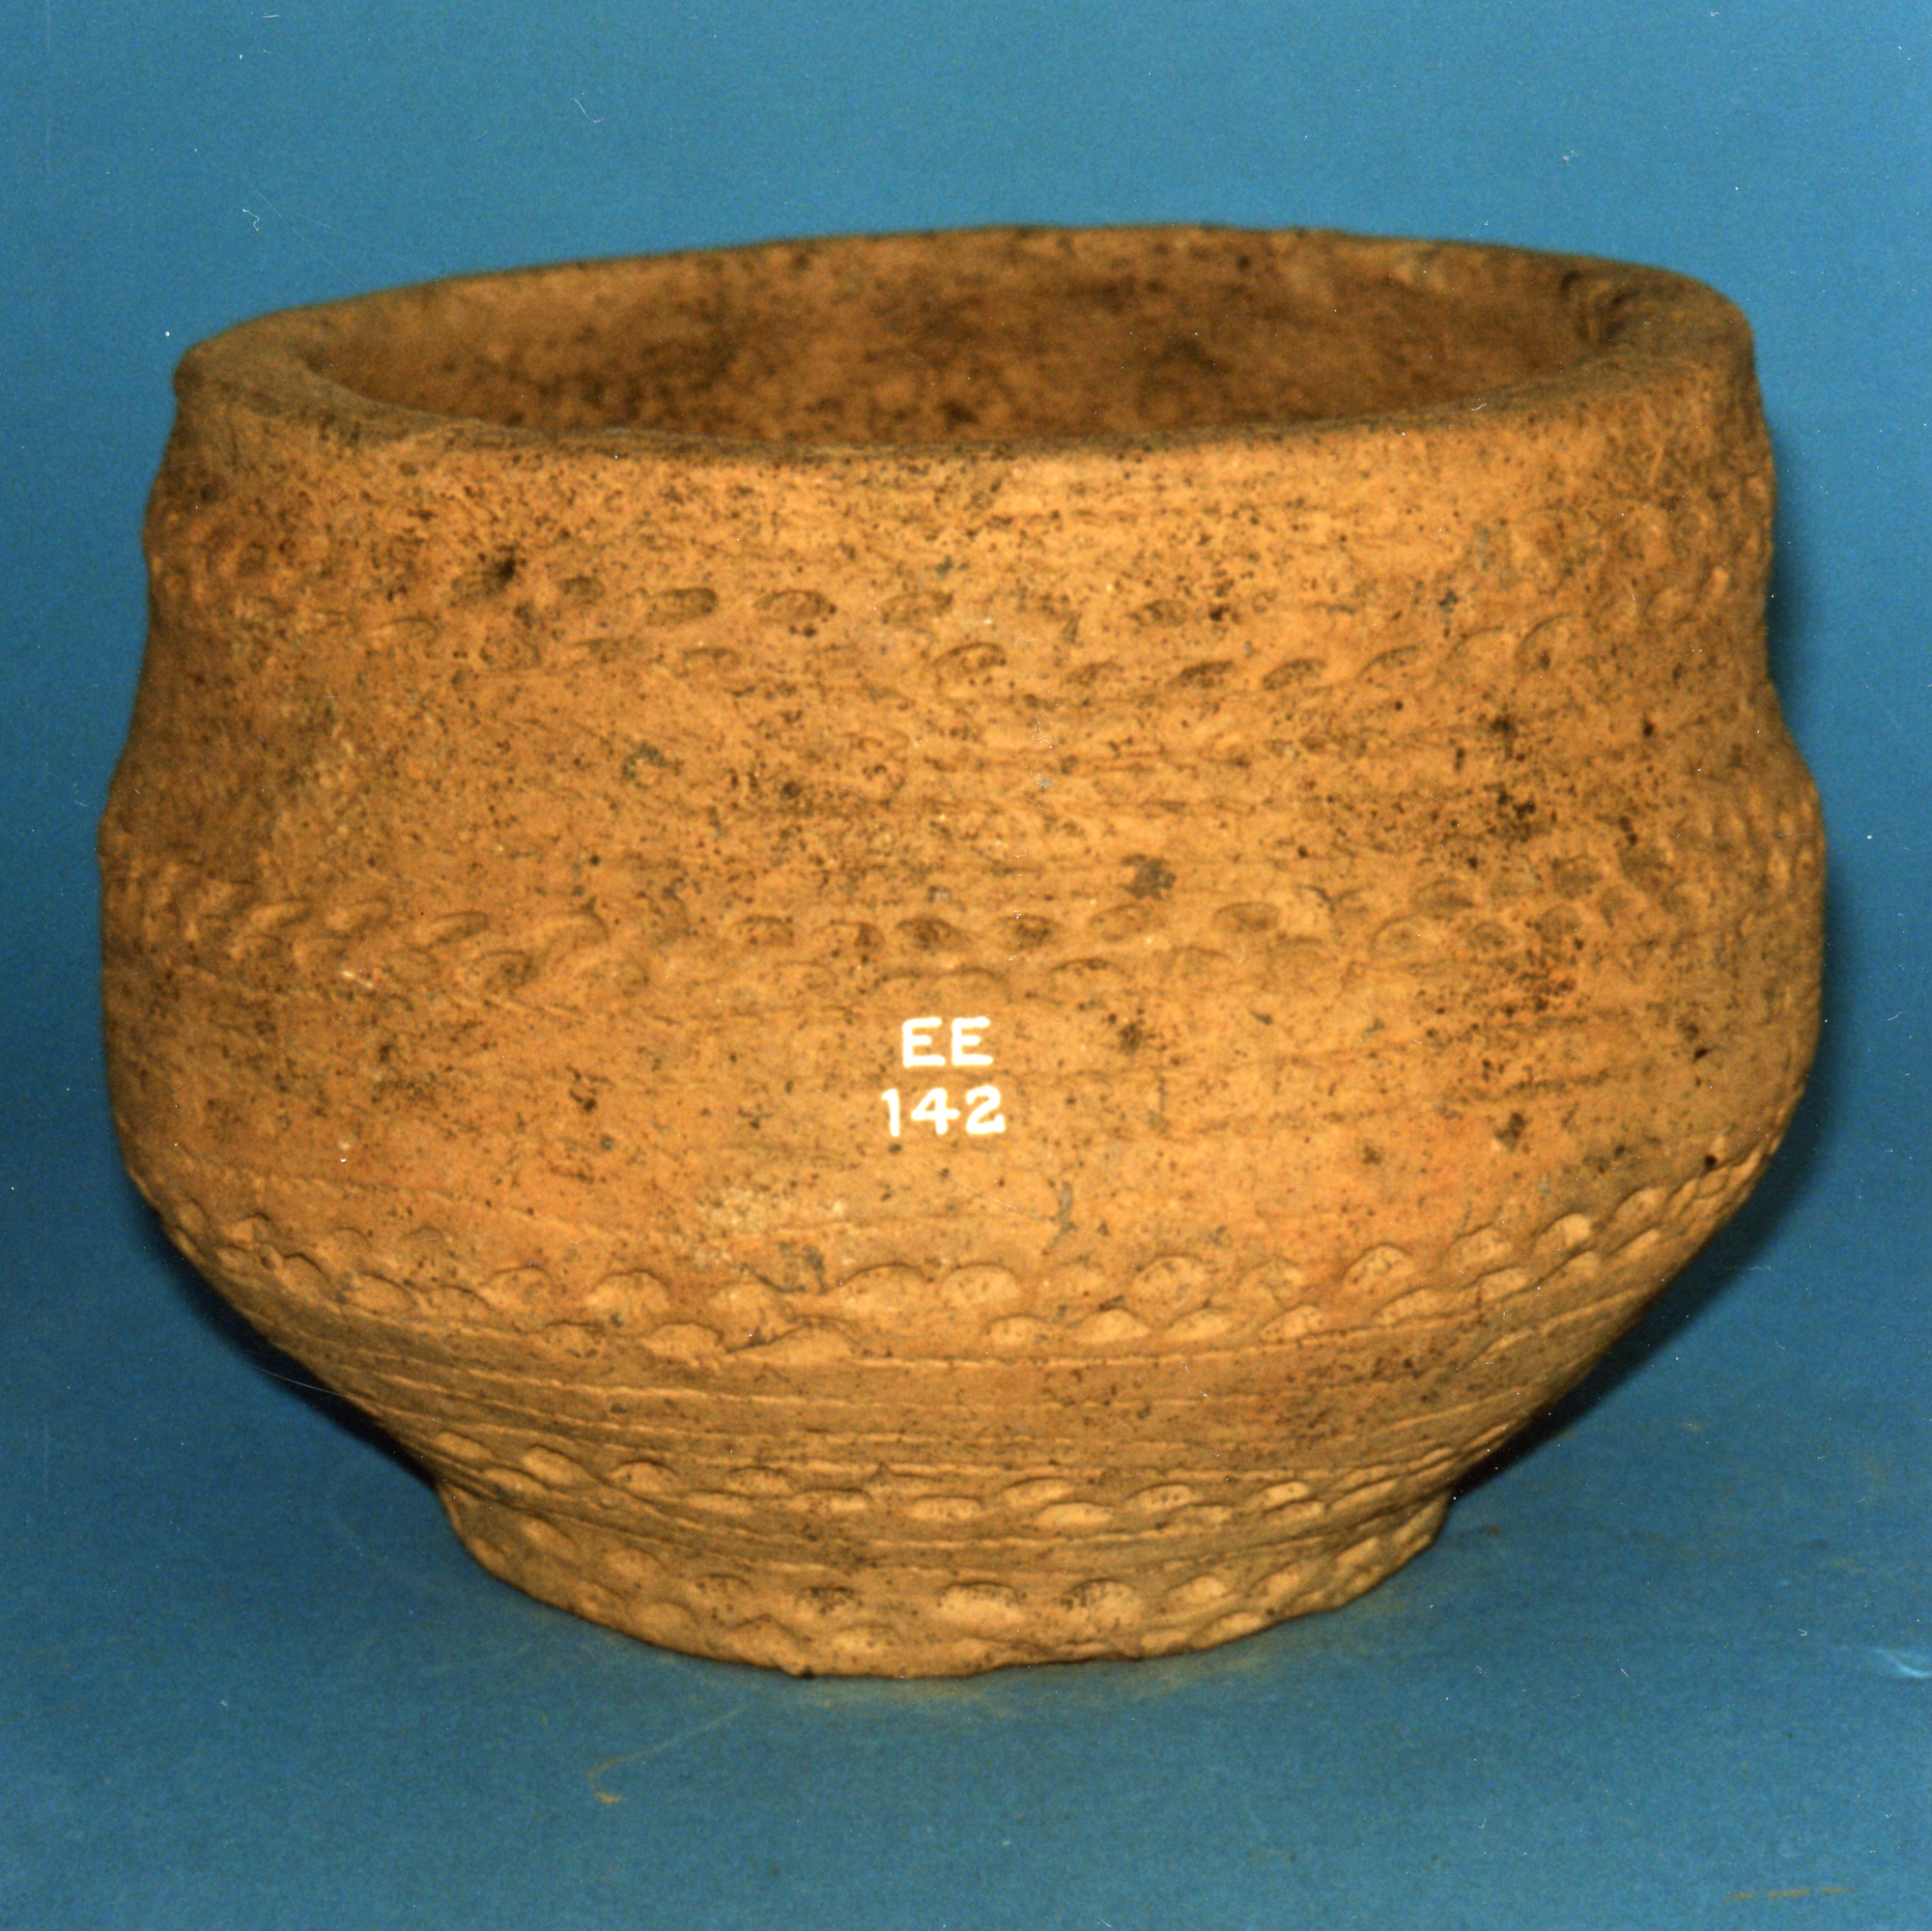 Image of Food vessel of reddish-buff ware, found in a short cist at Knockhills, Kirkden, Angus © National Museums Scotland